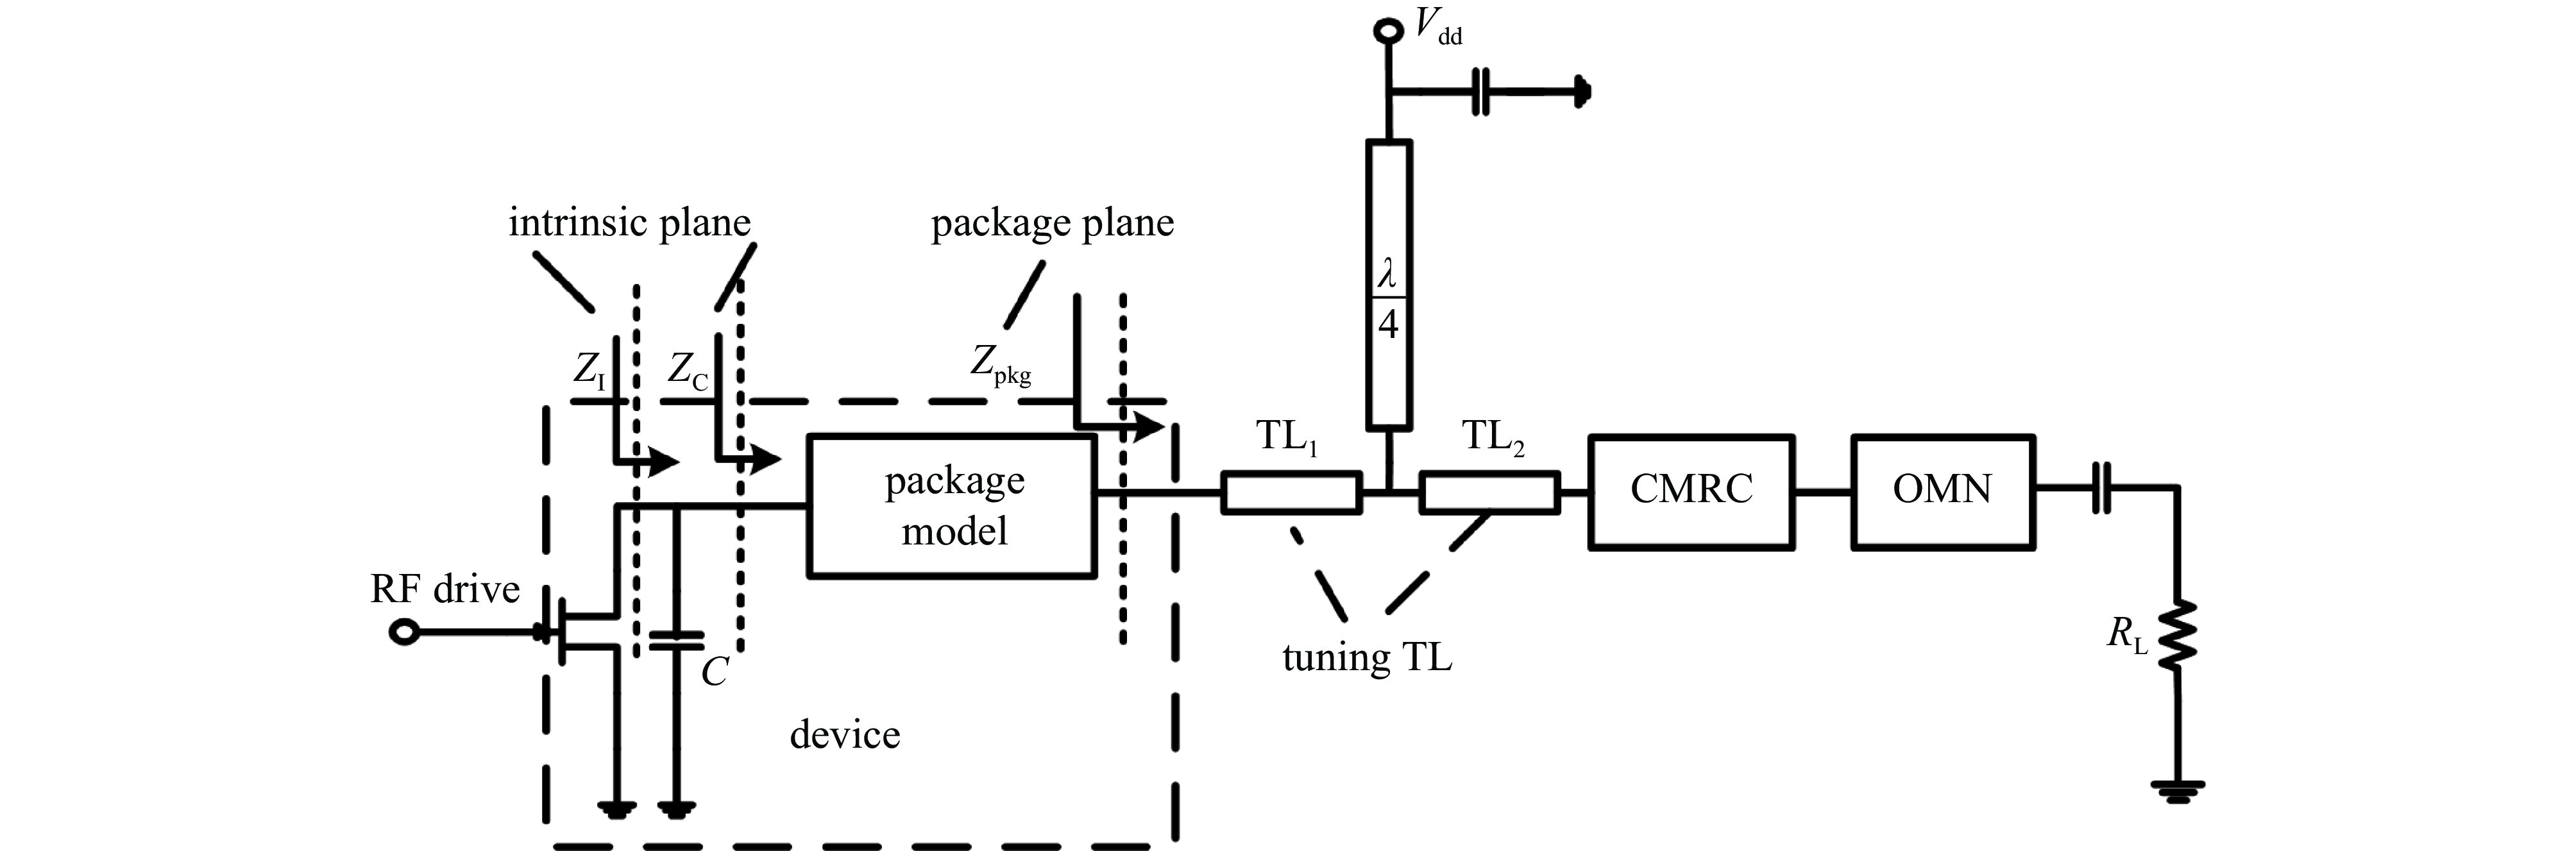 Structure of the proposed high power and high-efficiency miniaturized power amplifiers with CMRC